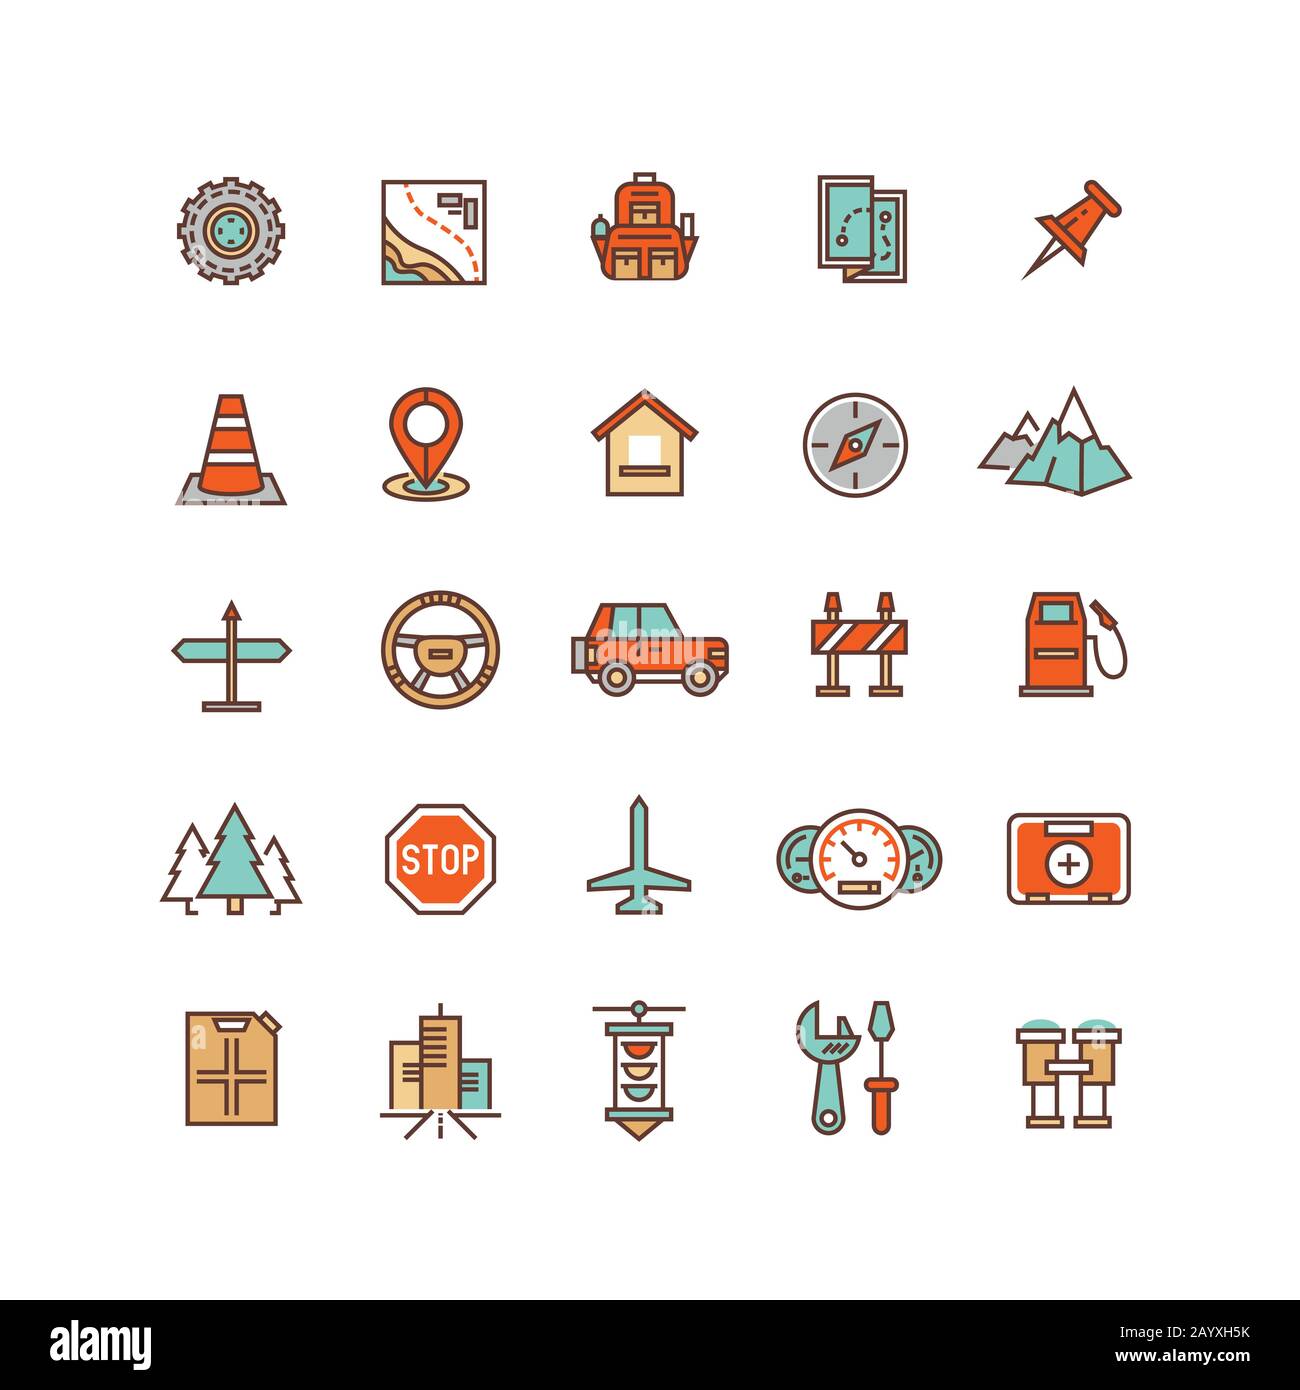 Road traffic flat vector icons. Traffic element of set, sign to travel traffic illustration Stock Vector